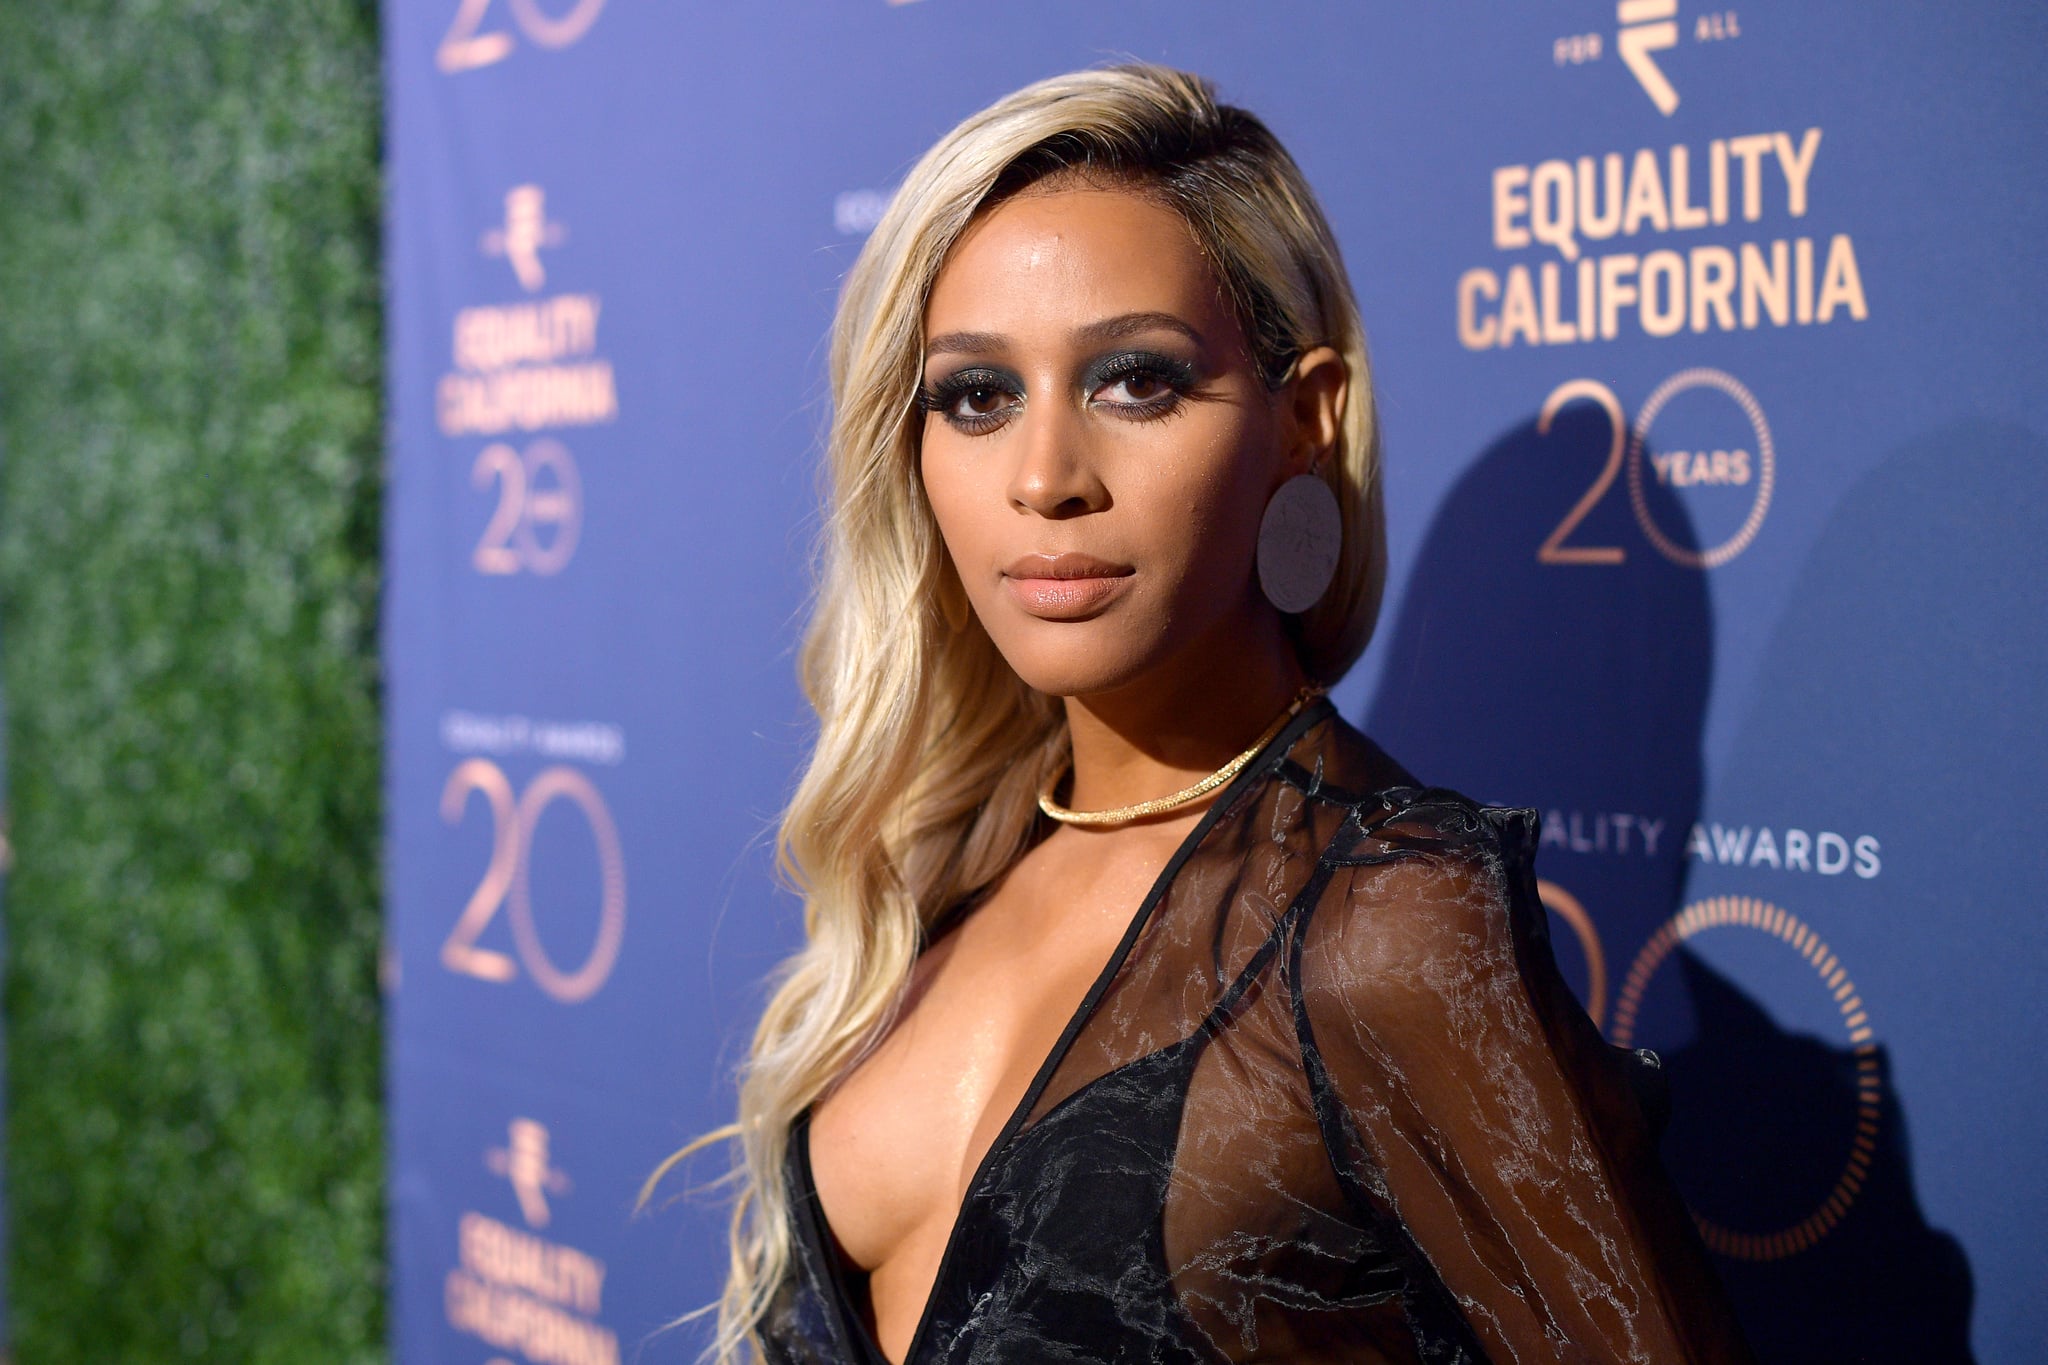 LOS ANGELES, CALIFORNIA - SEPTEMBER 28: Isis King attends Equality California's Special 20th Anniversary Los Angeles Equality Awards at the JW Marriott Los Angeles at L.A. LIVE on September 28, 2019 in Los Angeles, California. (Photo by Matt Winkelmeyer/Getty Images for Equality California)